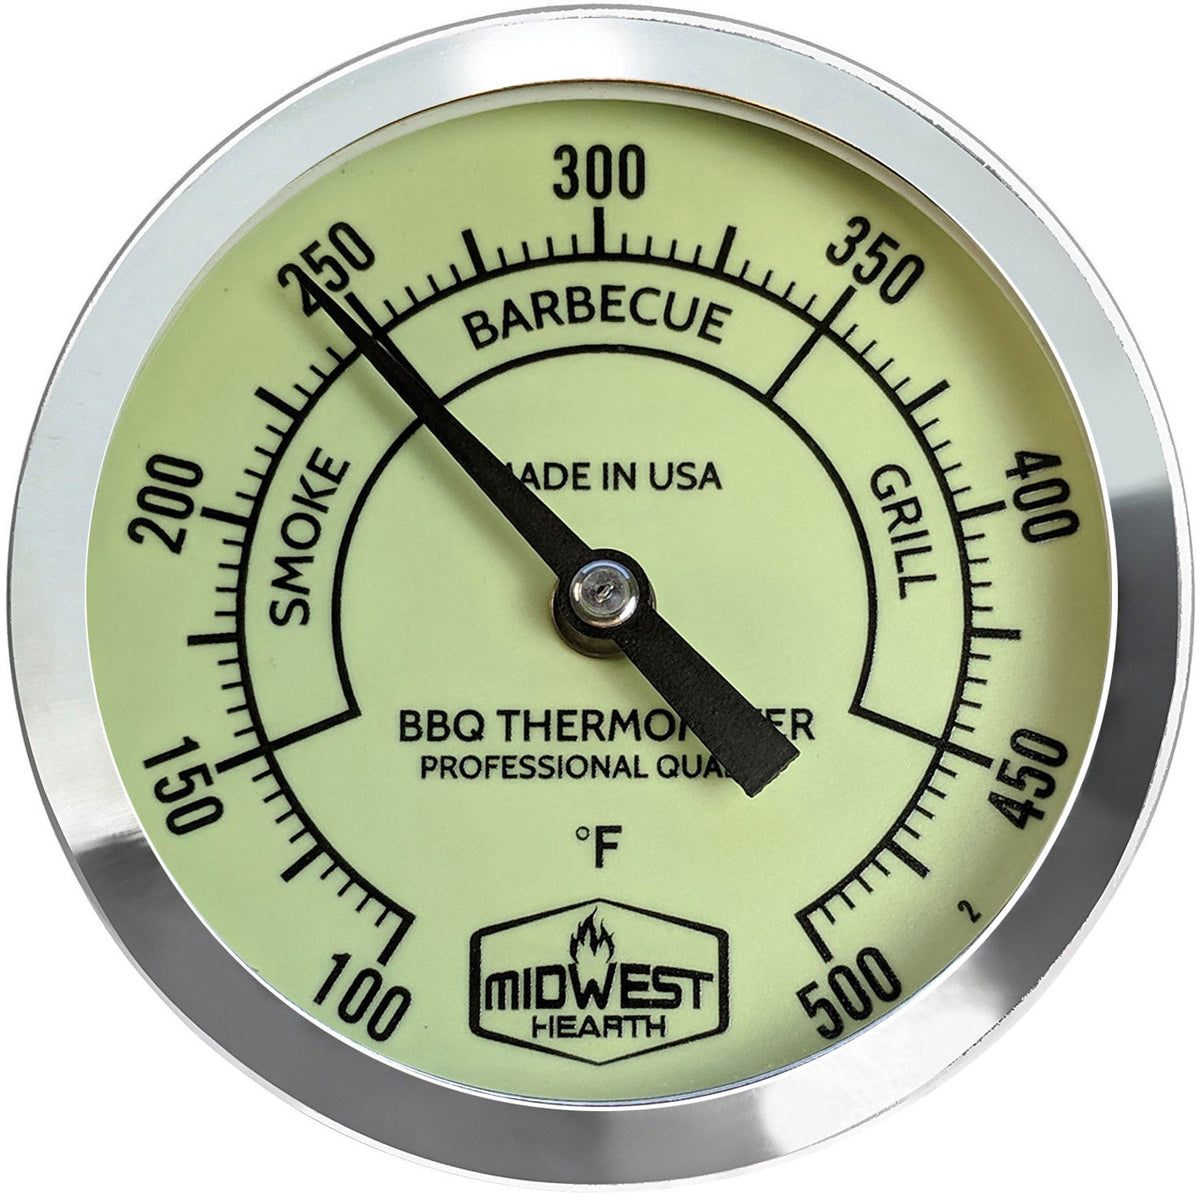 Midwest Hearth BBQ Smoker Thermometer for Barbecue Grill, Pit, Barrel 3 Dial (4 Stem Length, Black Dial)